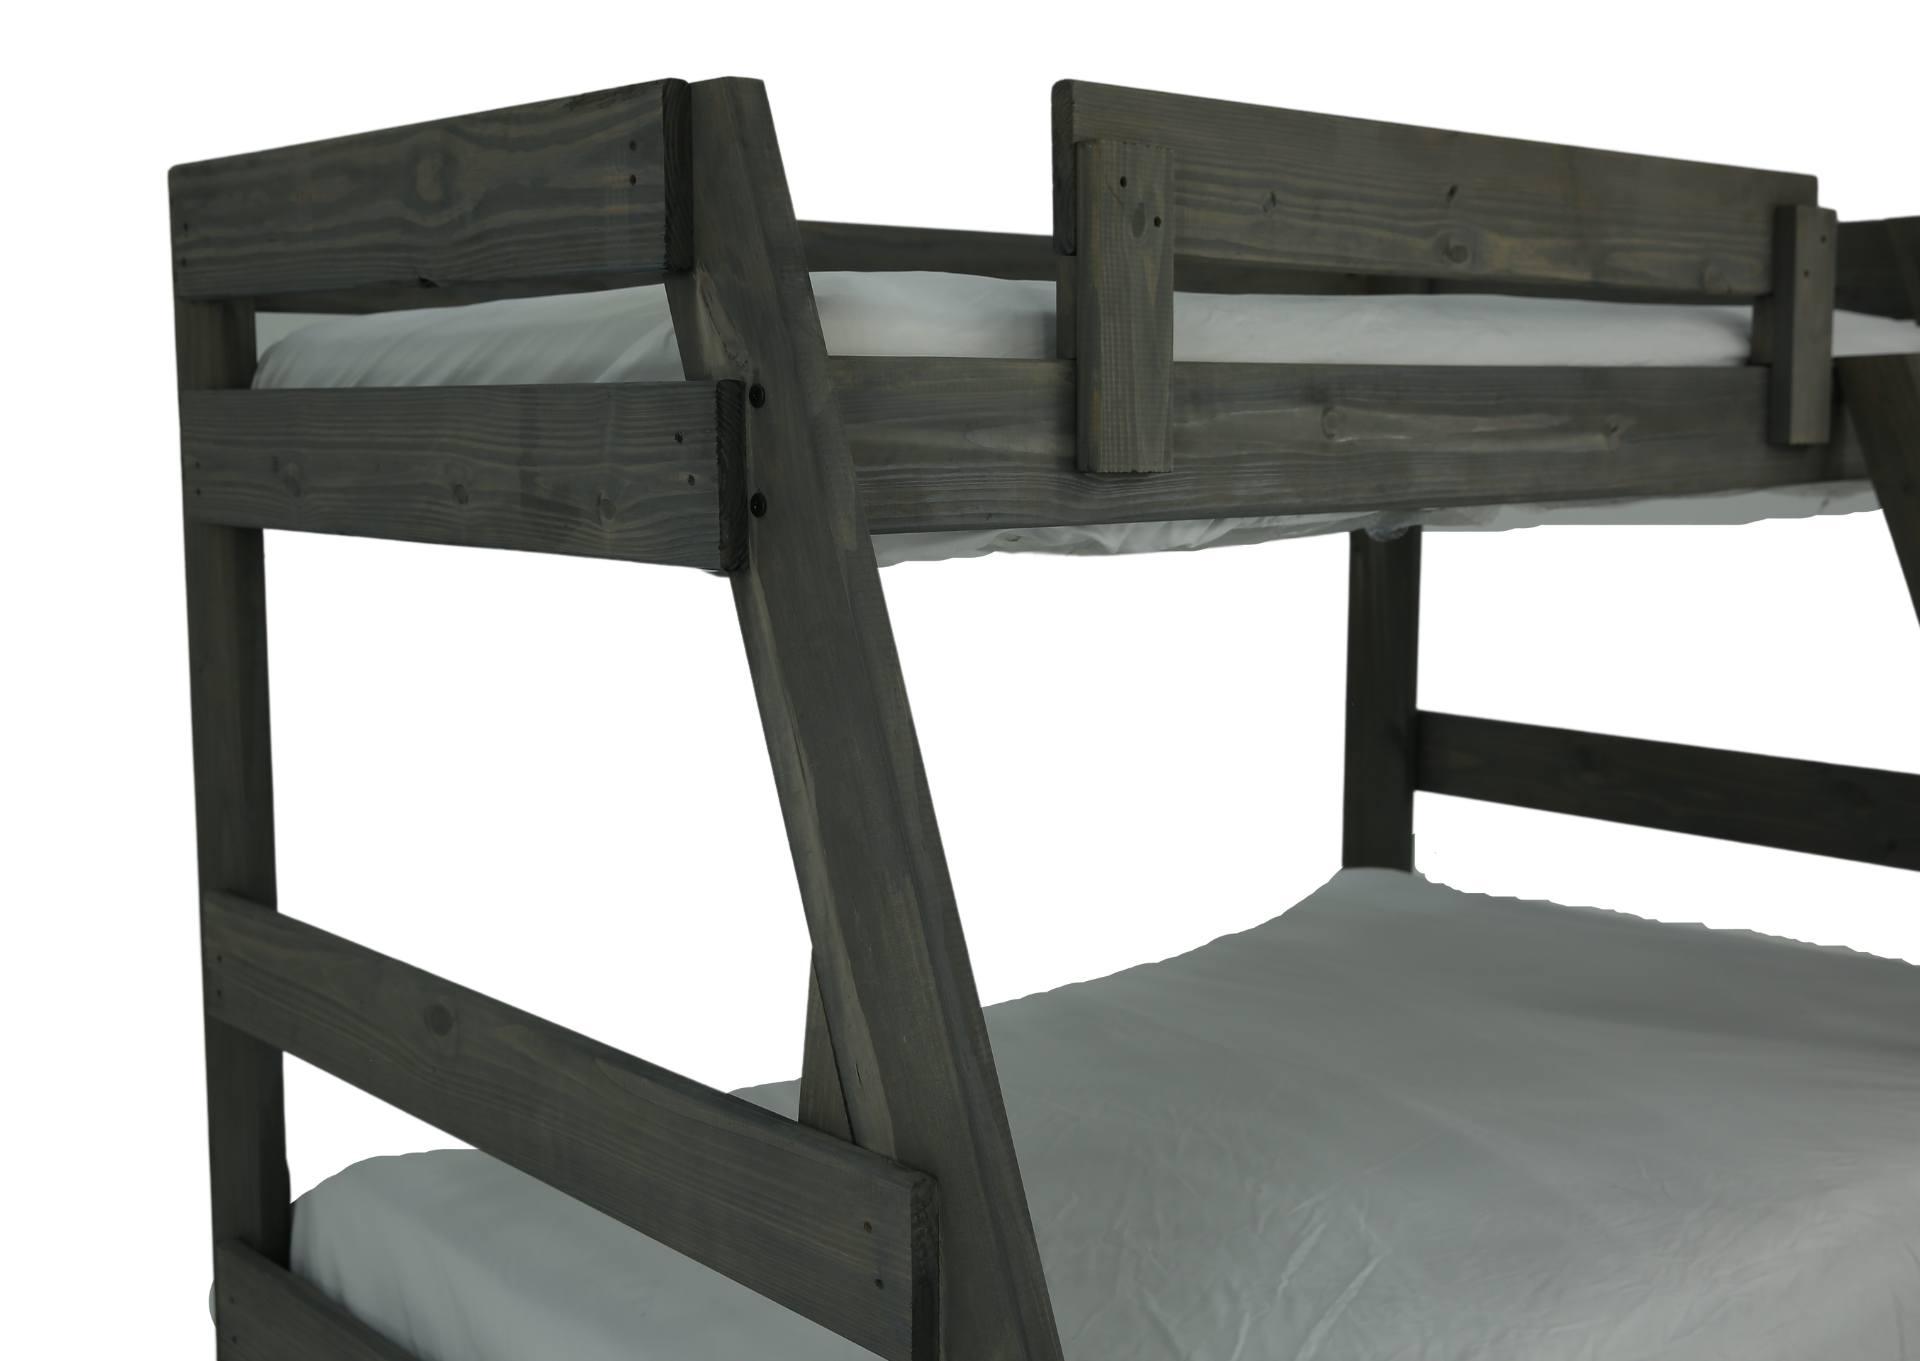 SAWYER DRIFTWOOD TWIN OVER FULL BUNKBED WITH BUNKIE BOARDS,SIMPLY BUNKBEDS